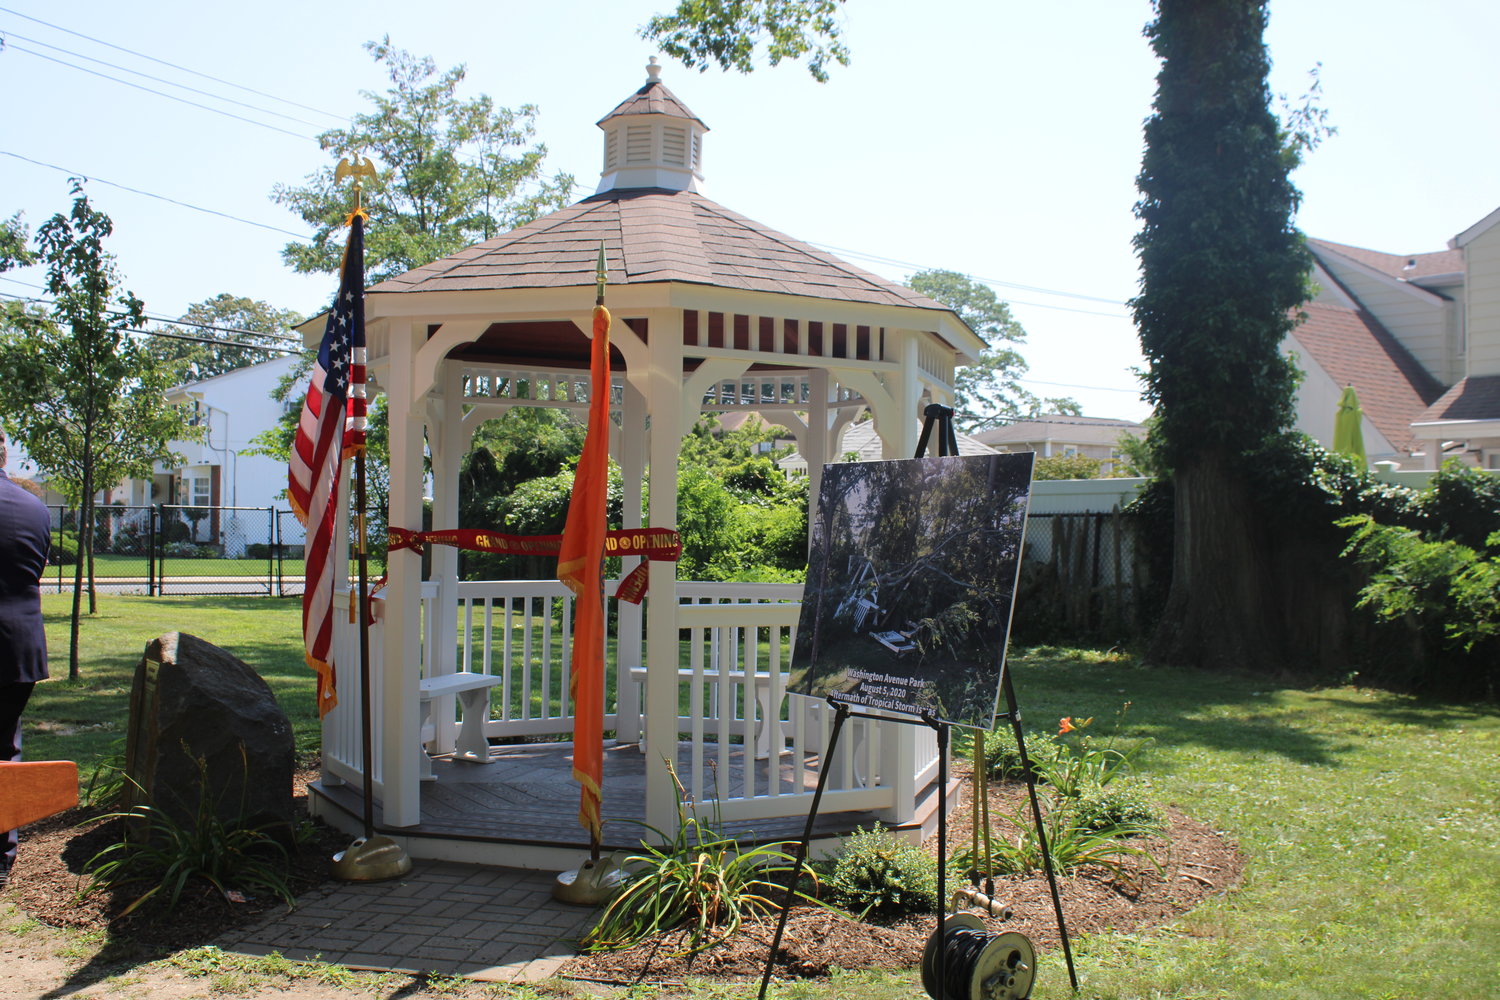 The new gazebo was unveiled at Washington Avenue Park in Seaford last week.